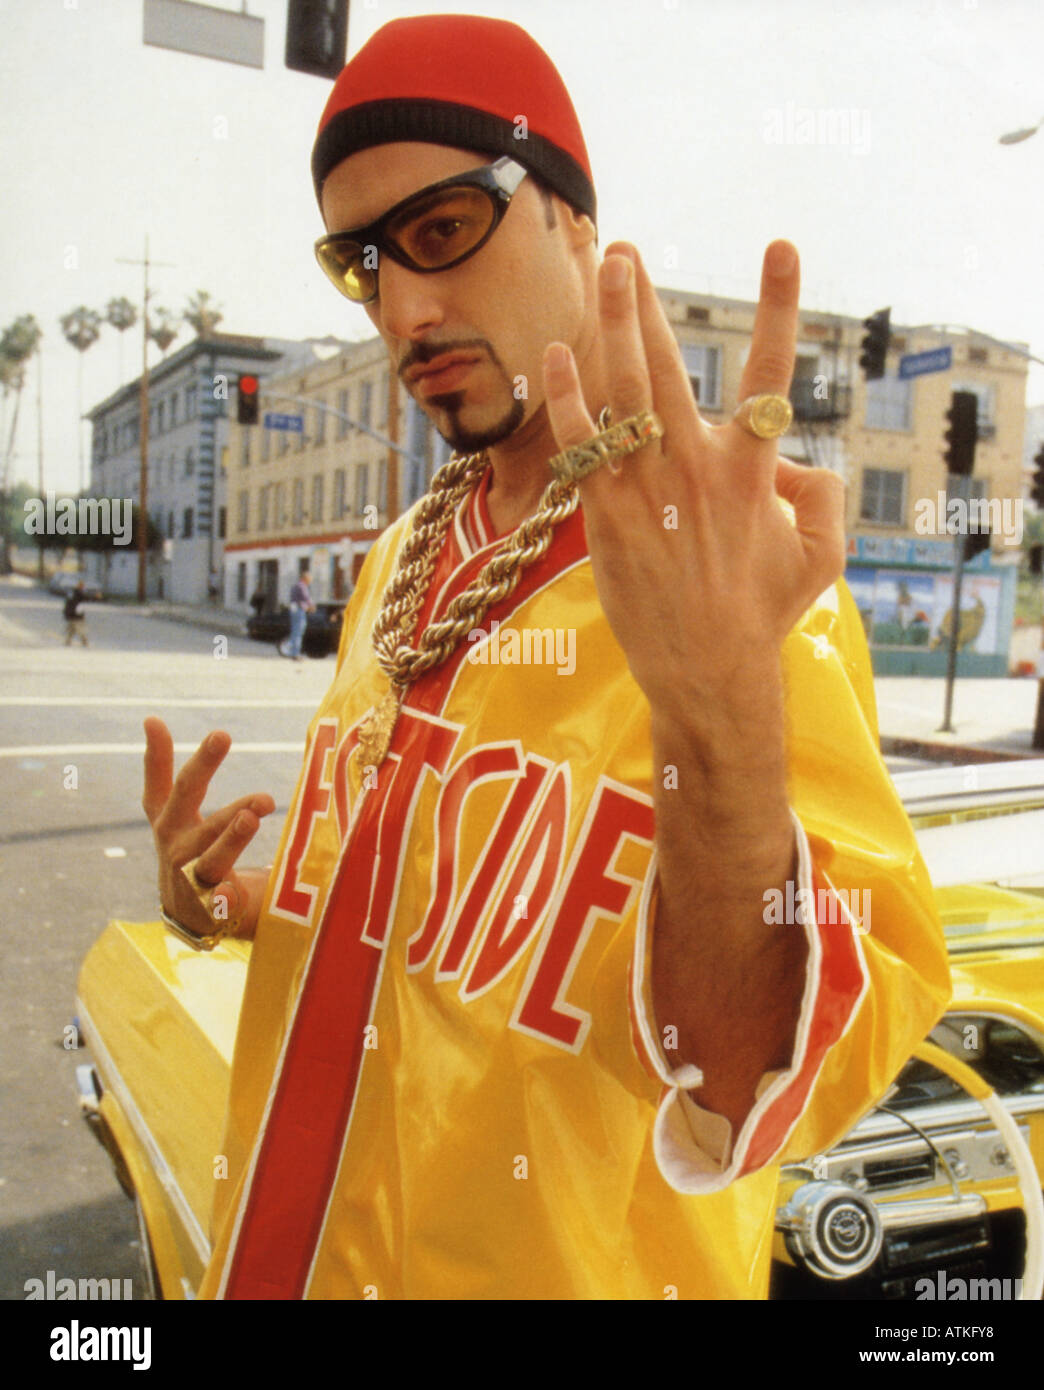 Sacha Baron Cohen to revive Ali G character in new stand-up tour